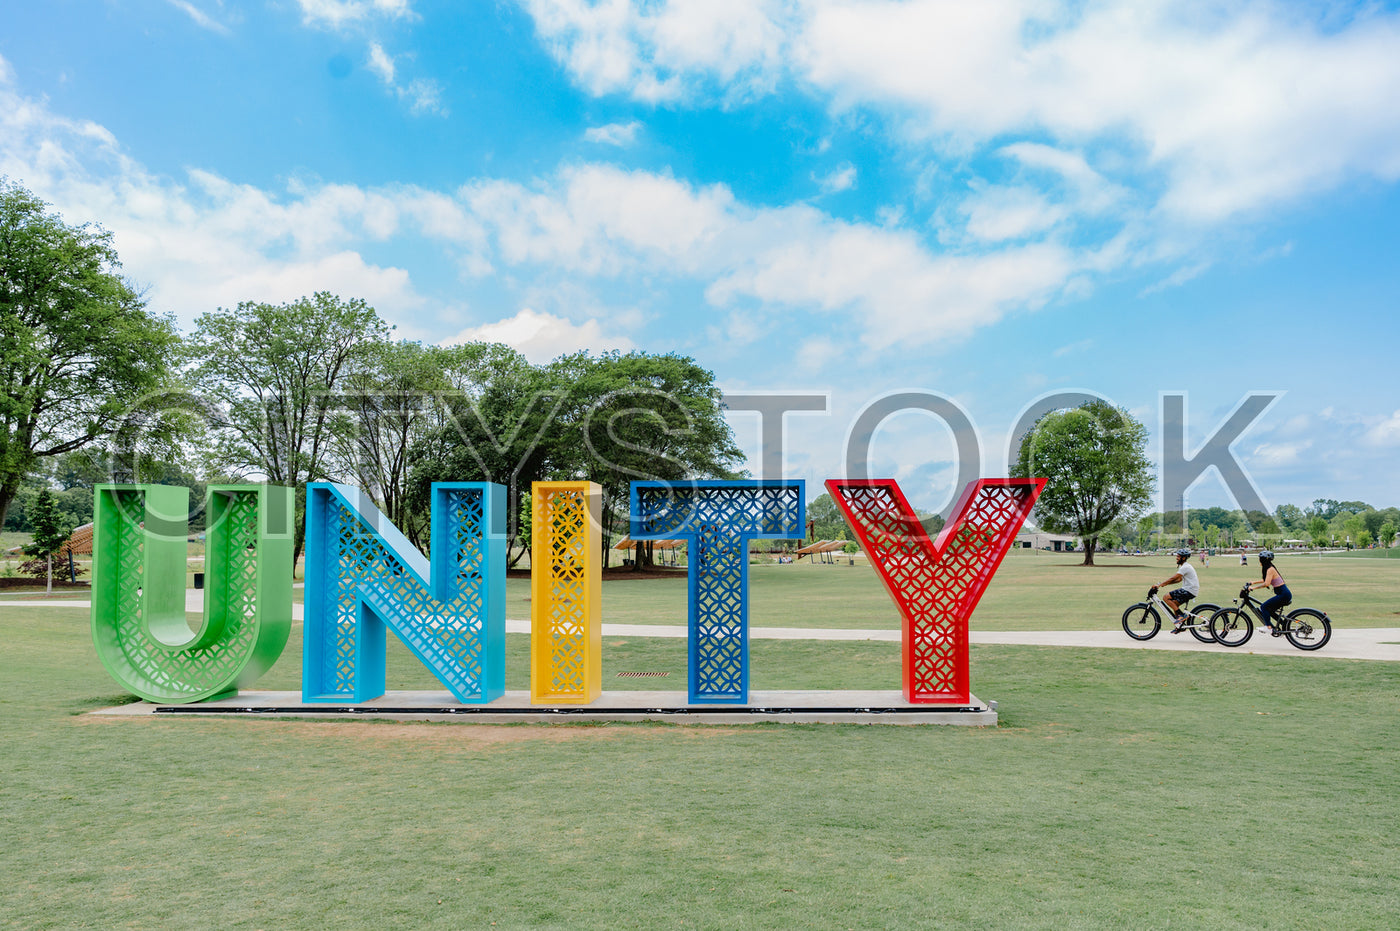 Colorful Unity Sculpture in Greenville Park with Cyclists